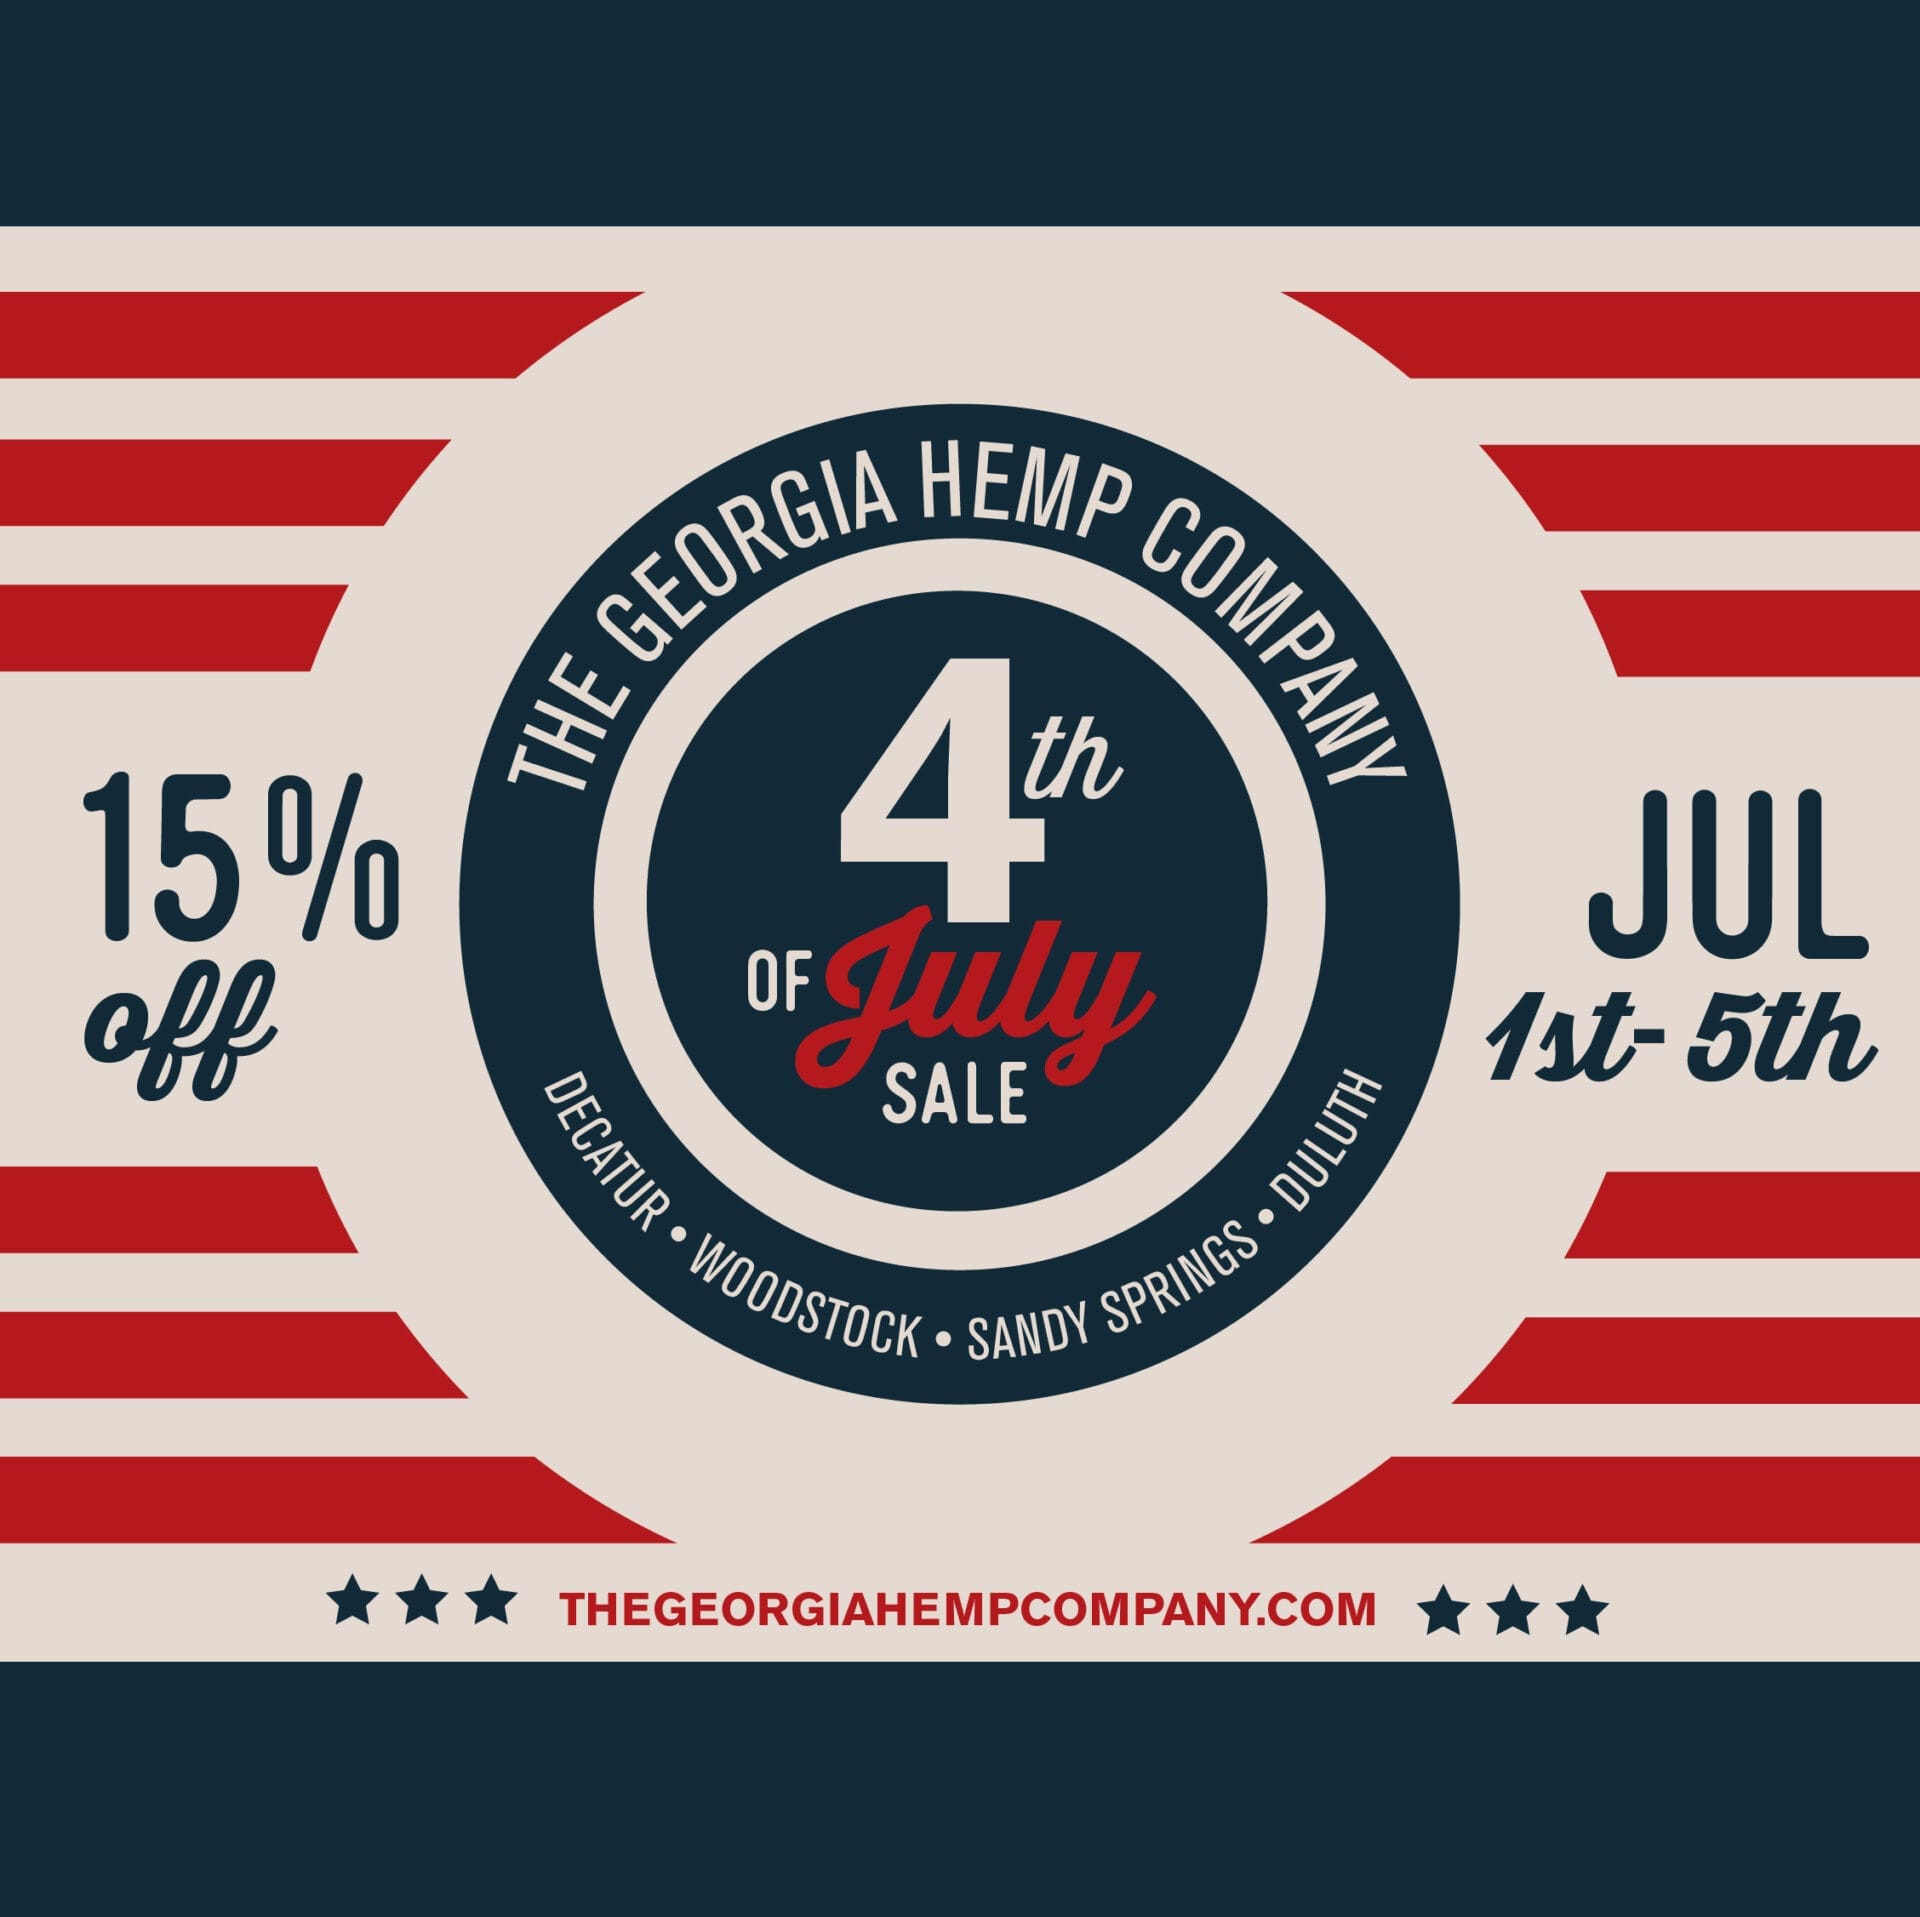 4th of July Sale: Get 15% off July 1-5th!